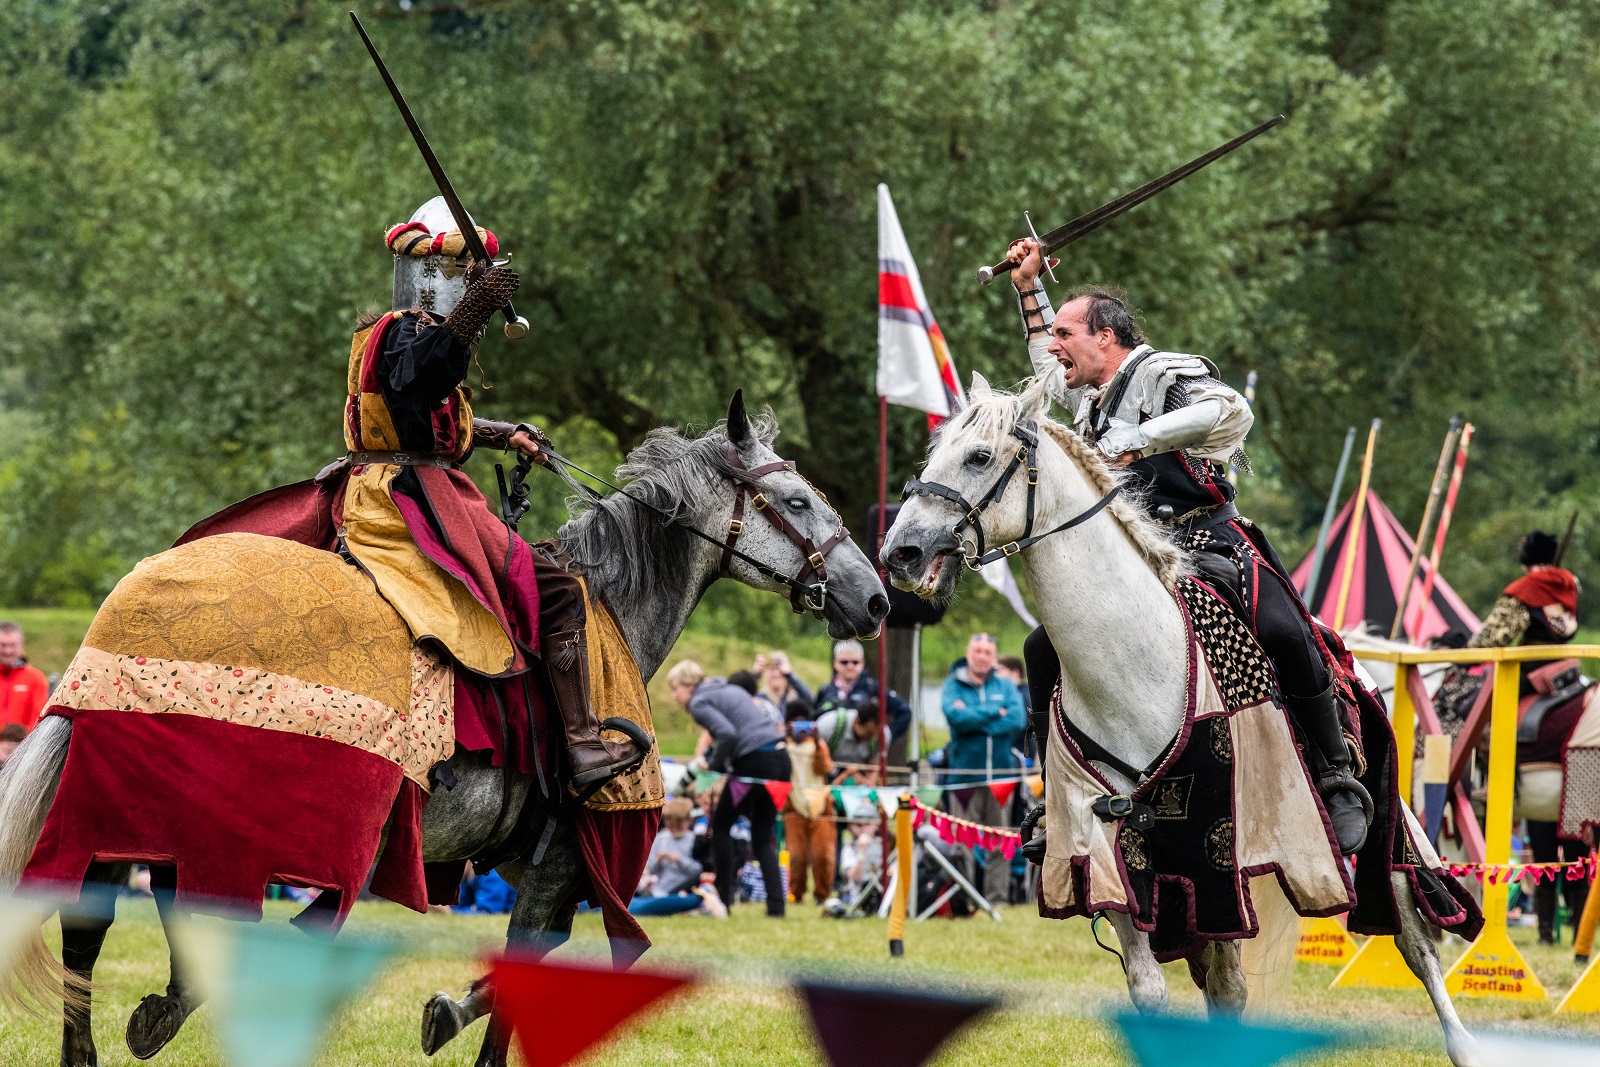 A knight on a horse riding., He carries a bow and arrow and looks at the audience triumphantly.